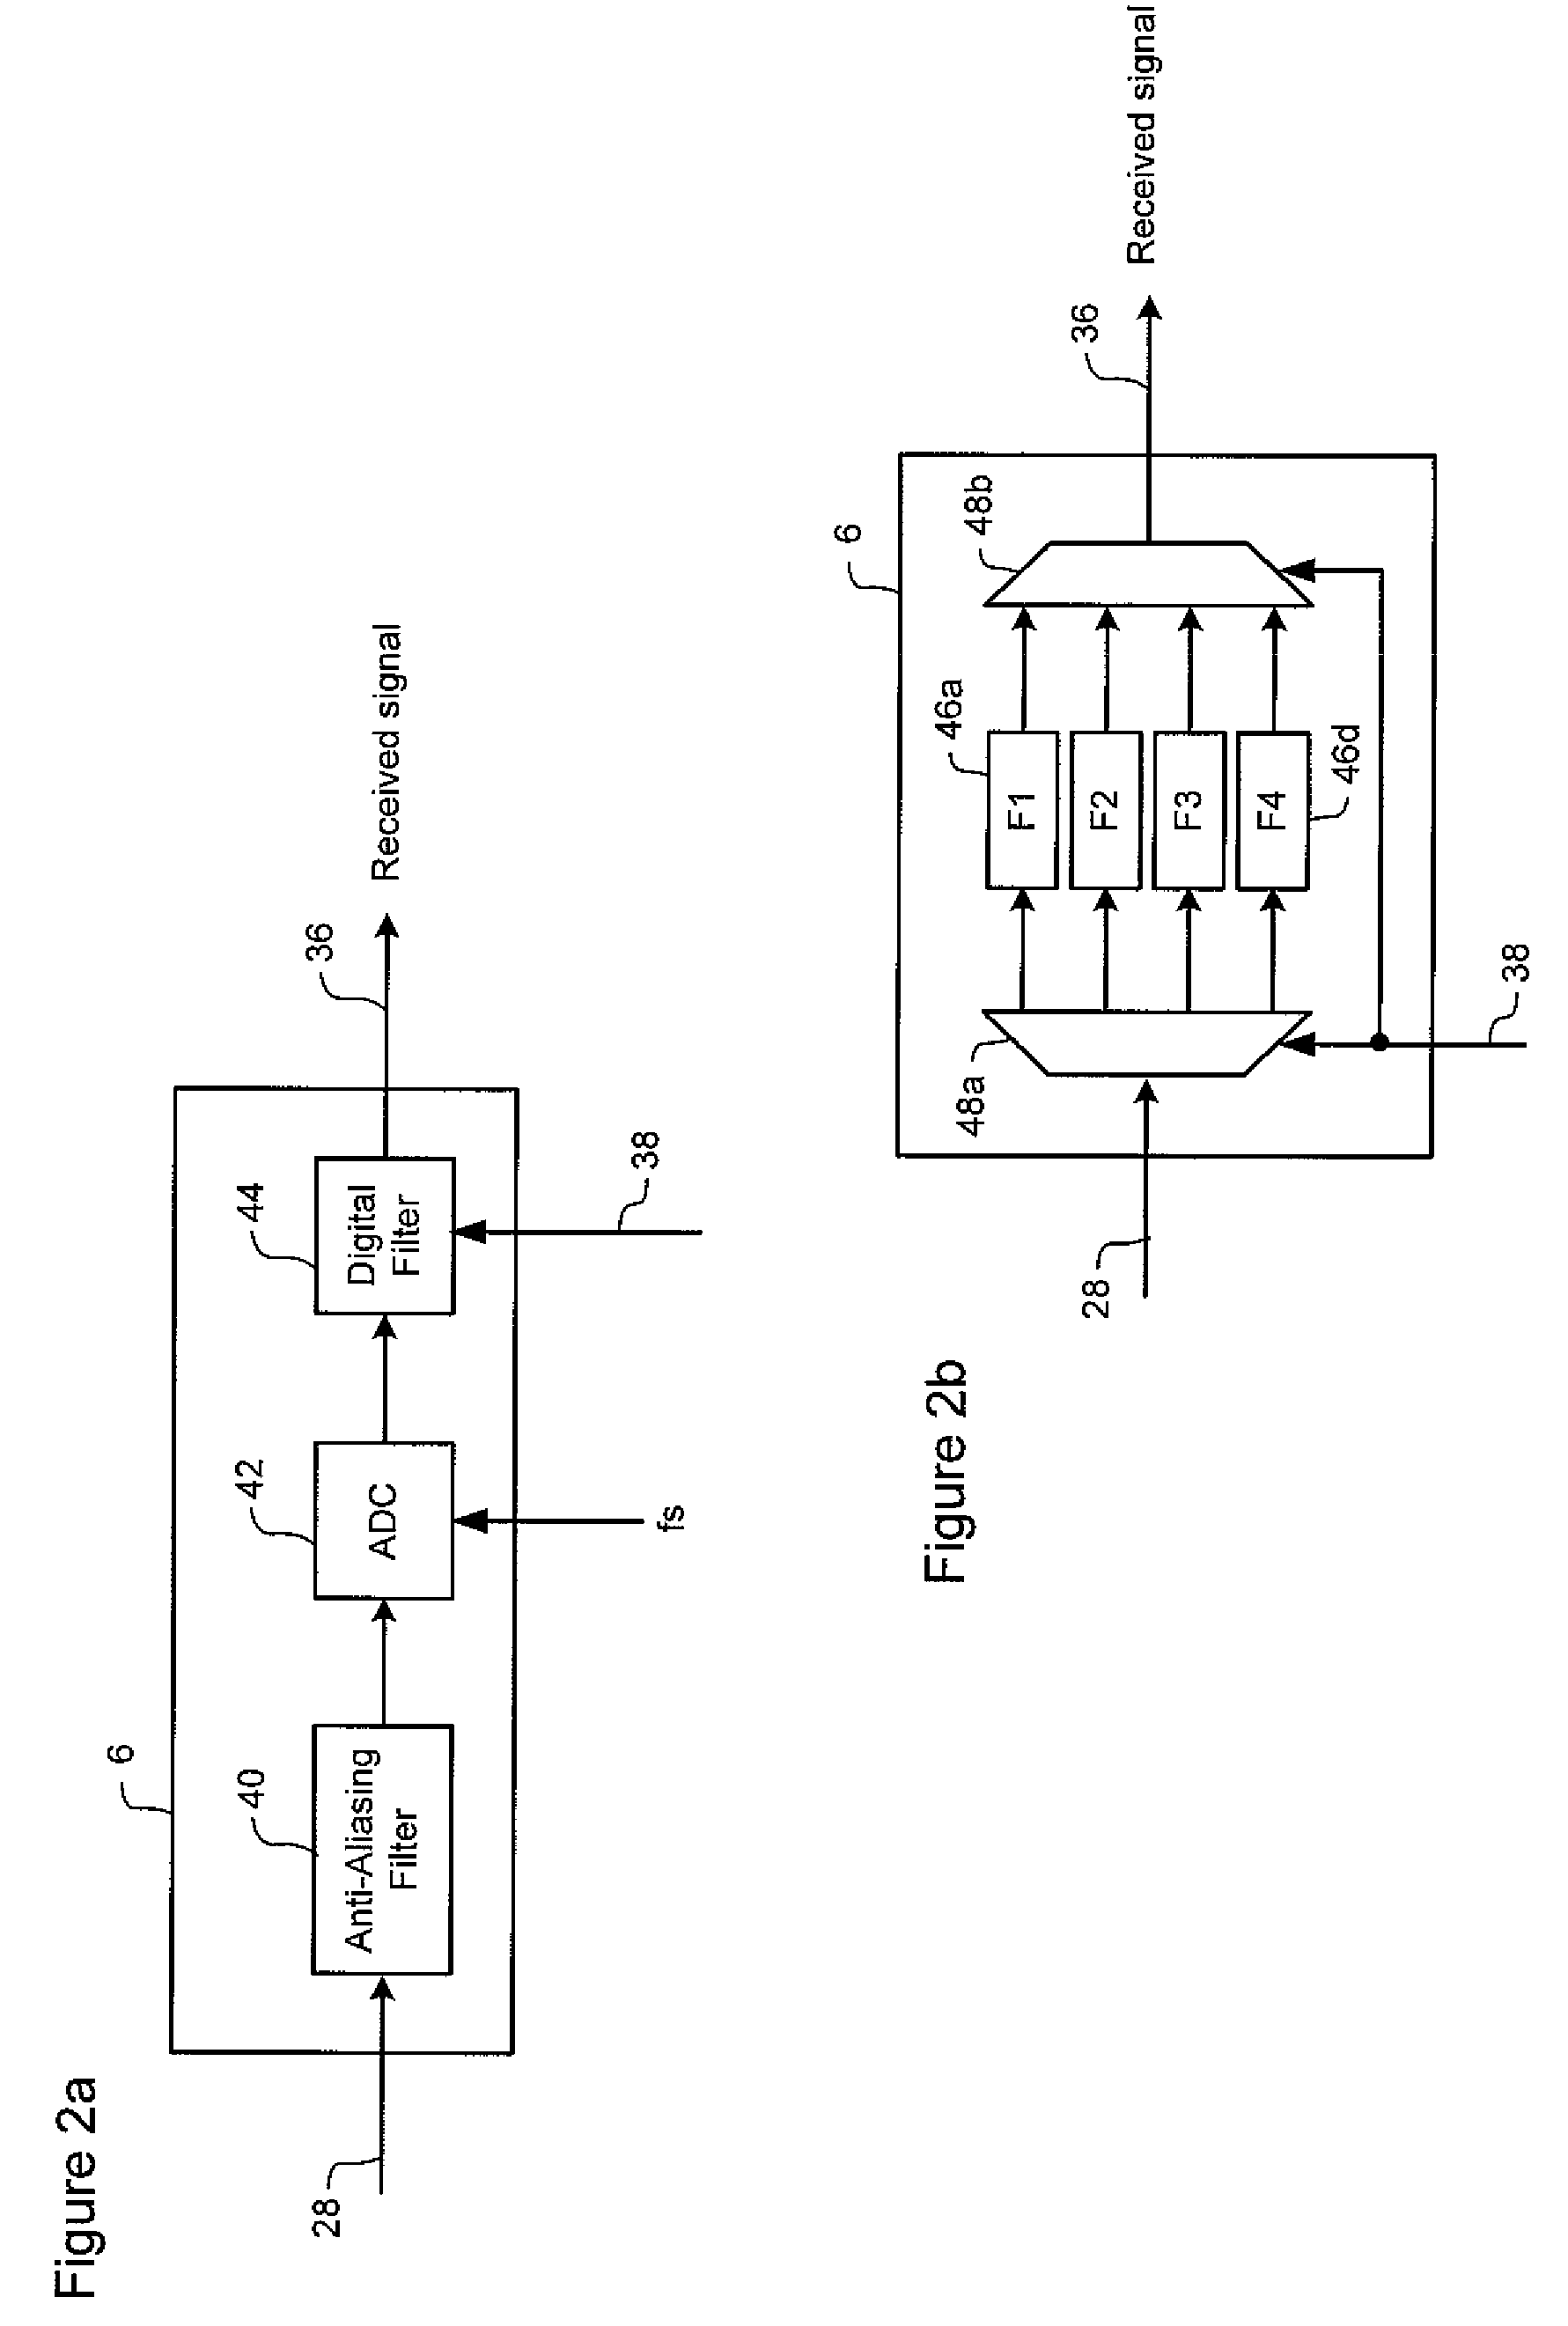 Frequency agile transmitter and receiver architecture for DWDM systems